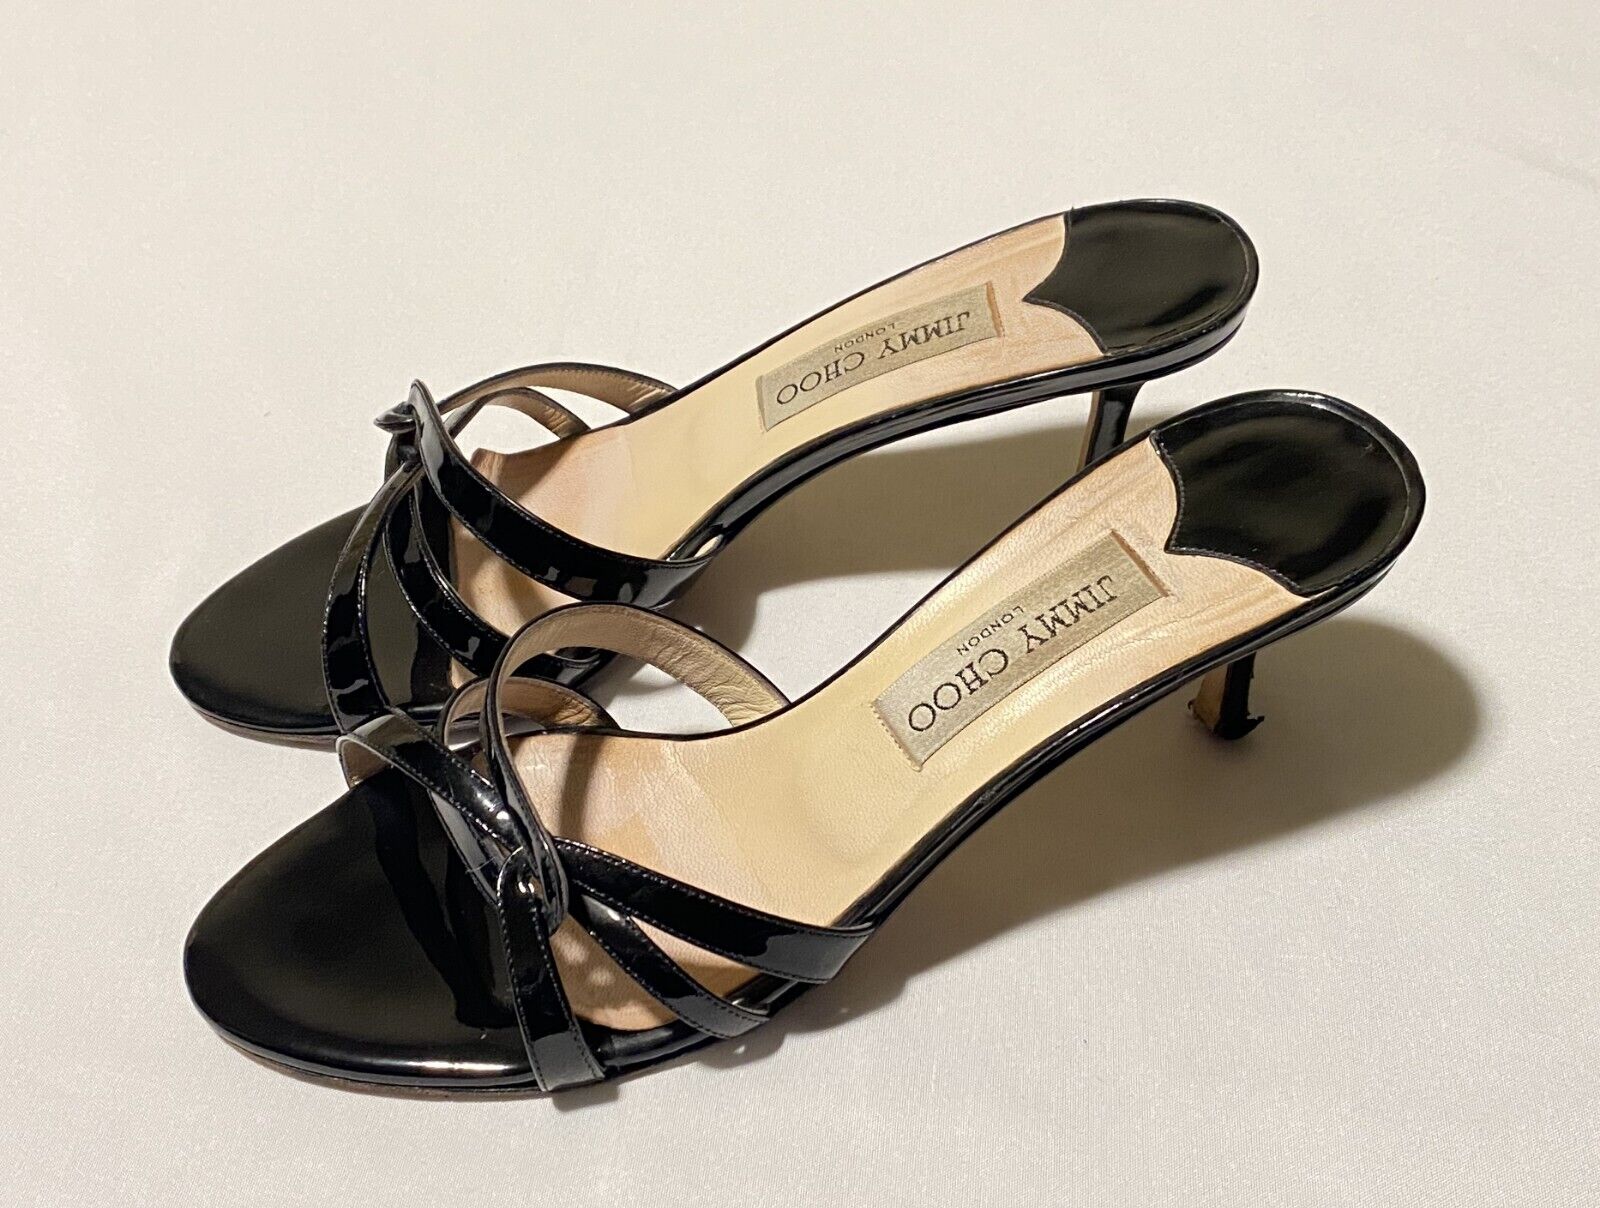 Jimmy Choo Patent Black Sandals Heels Women Shoes Size 37.5 - US 7.5 Made Italy